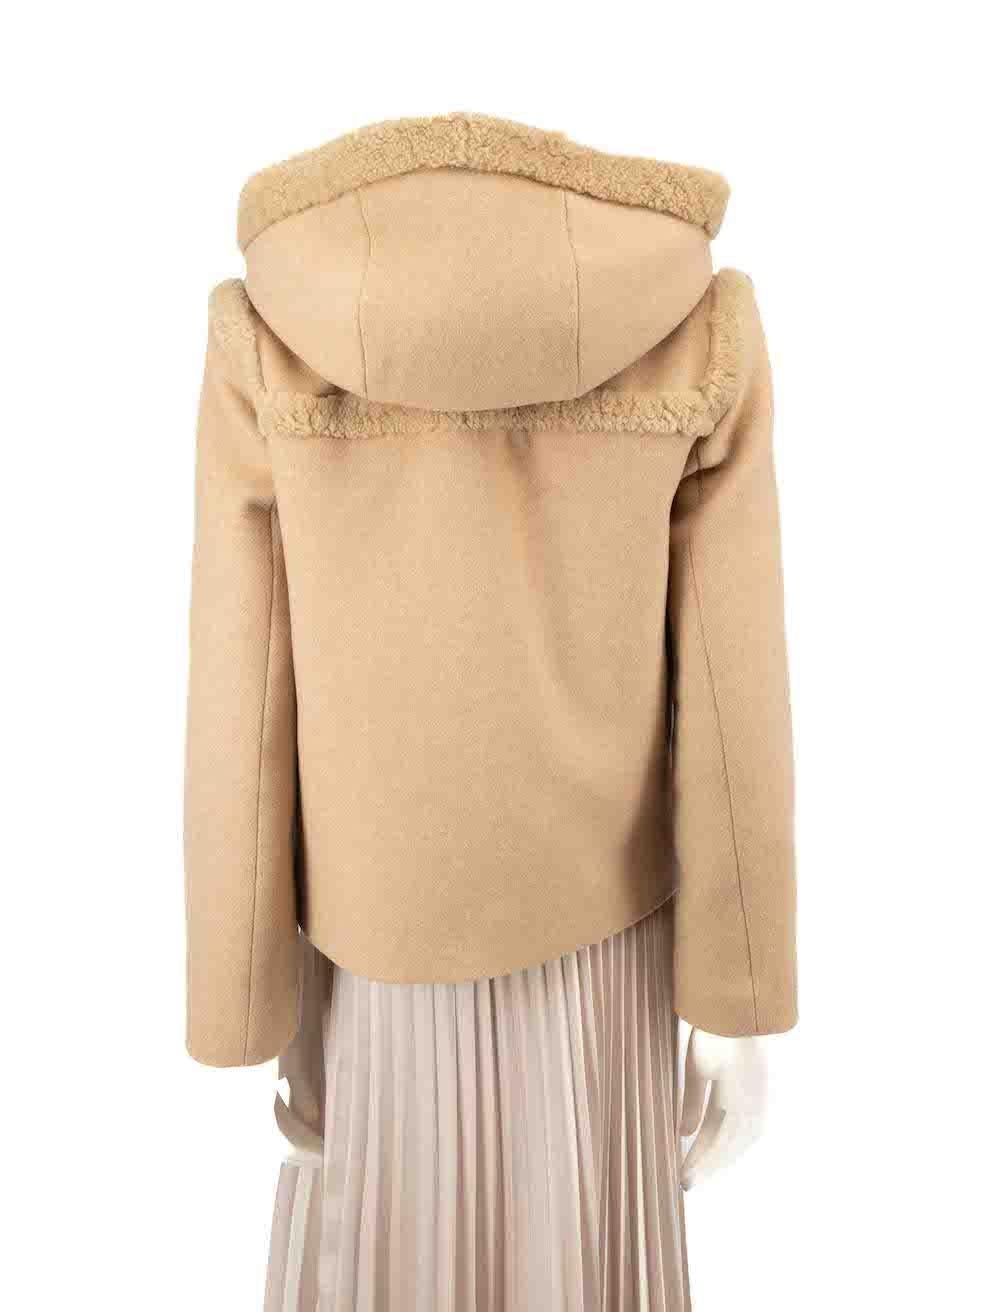 Sandro Camel Wool Hooded Shearling Coat Size S In Good Condition For Sale In London, GB